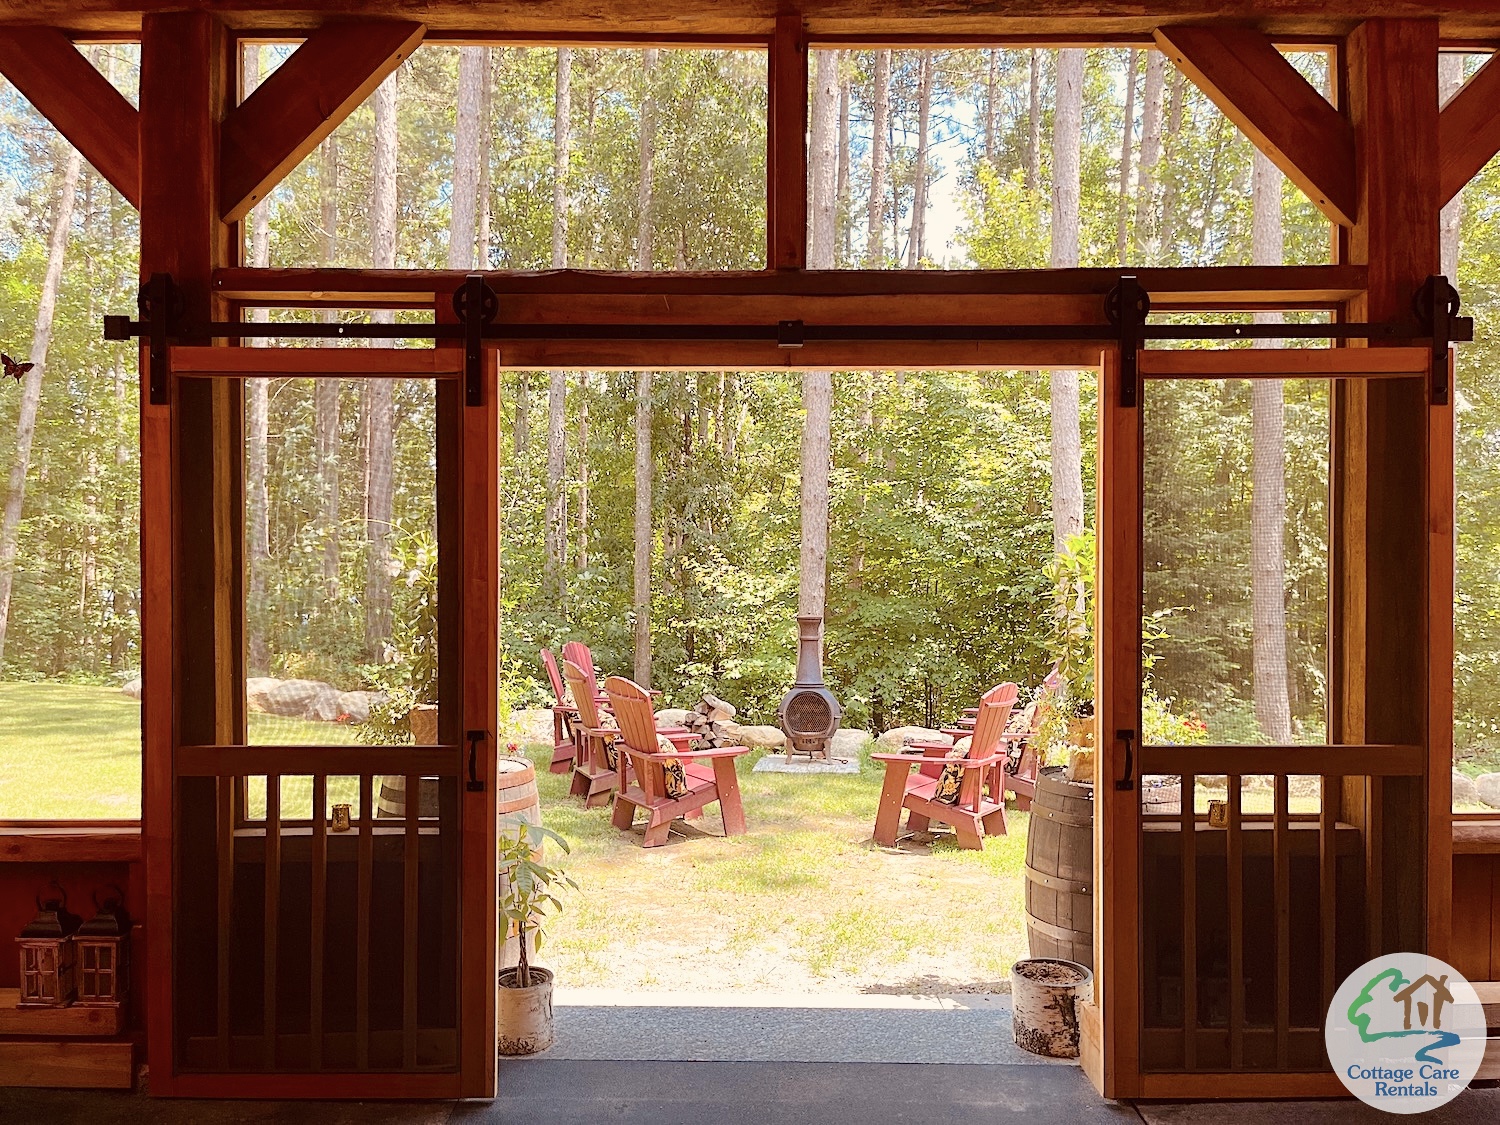 Boshkung Acres - Porch to outdoor chiminea seating